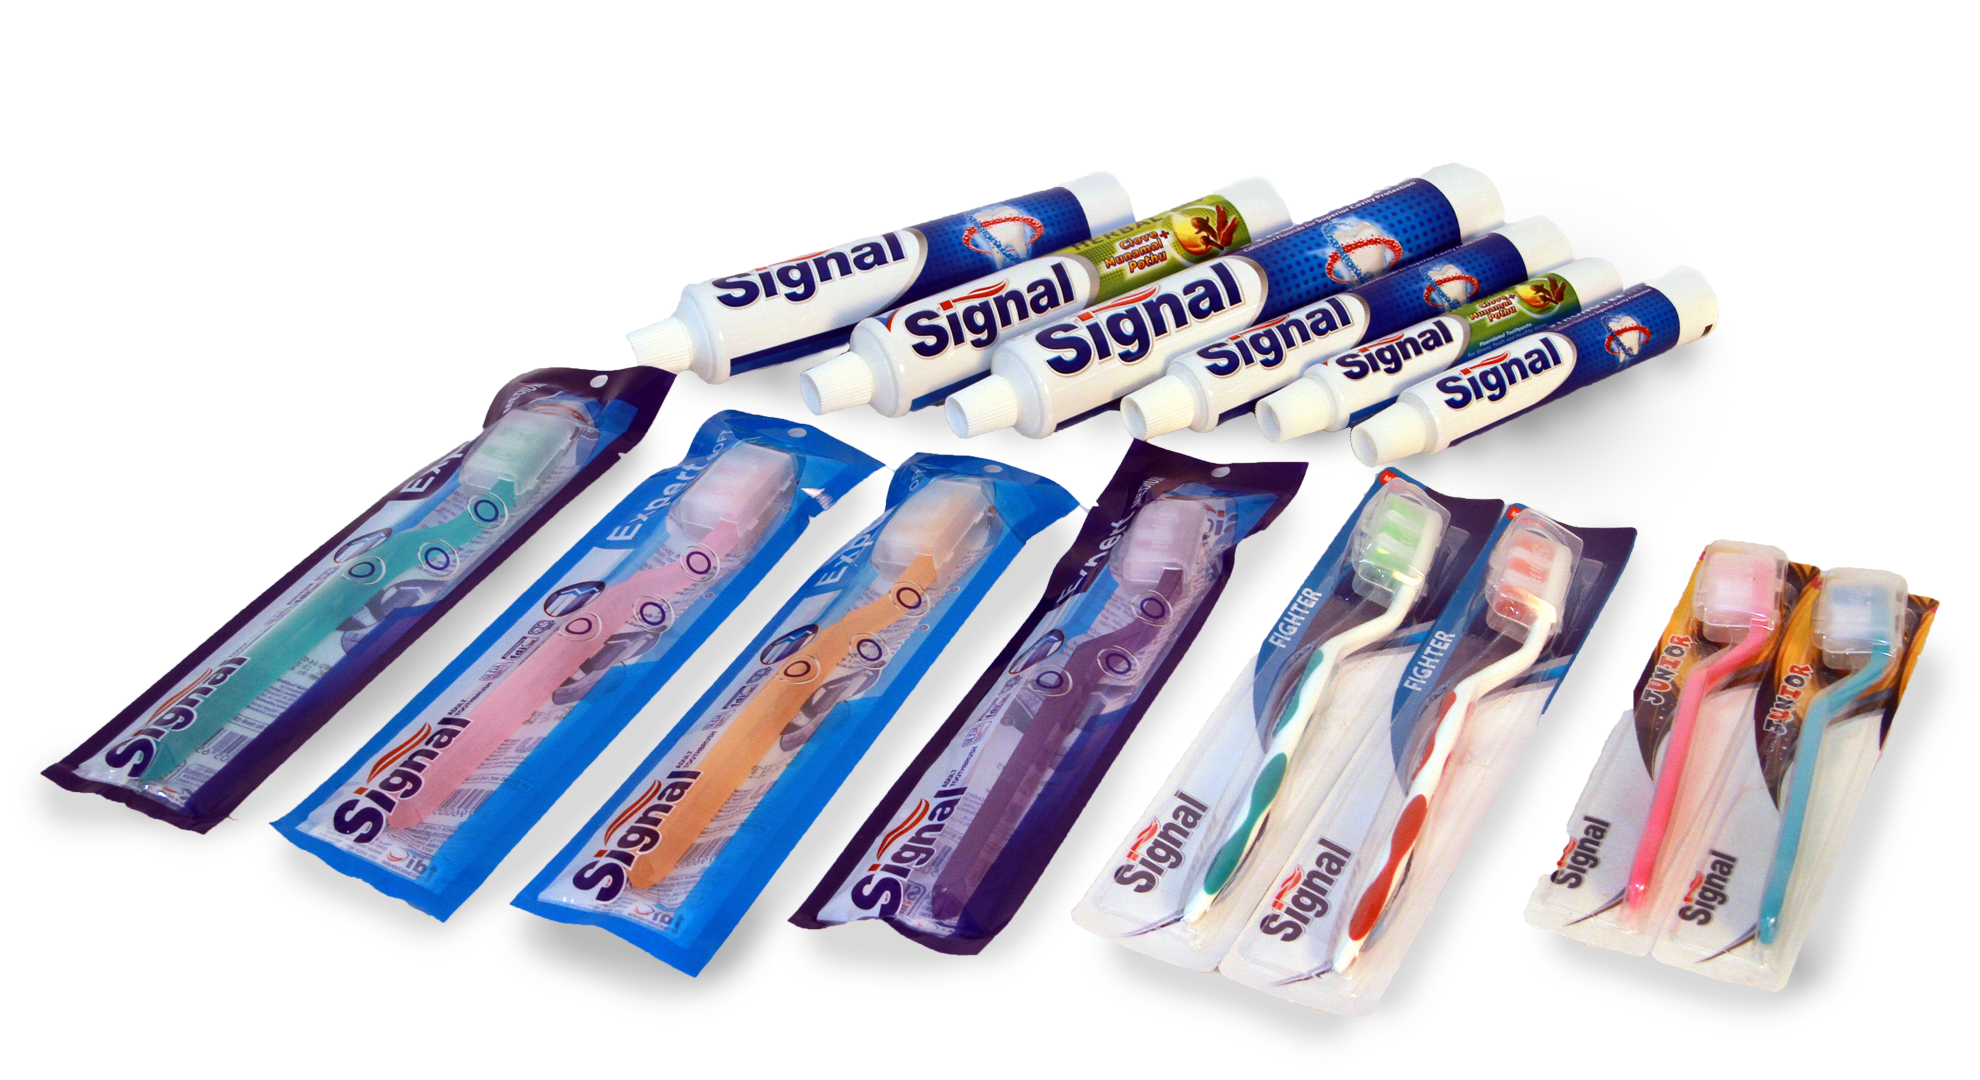 Signal Tooth brushes